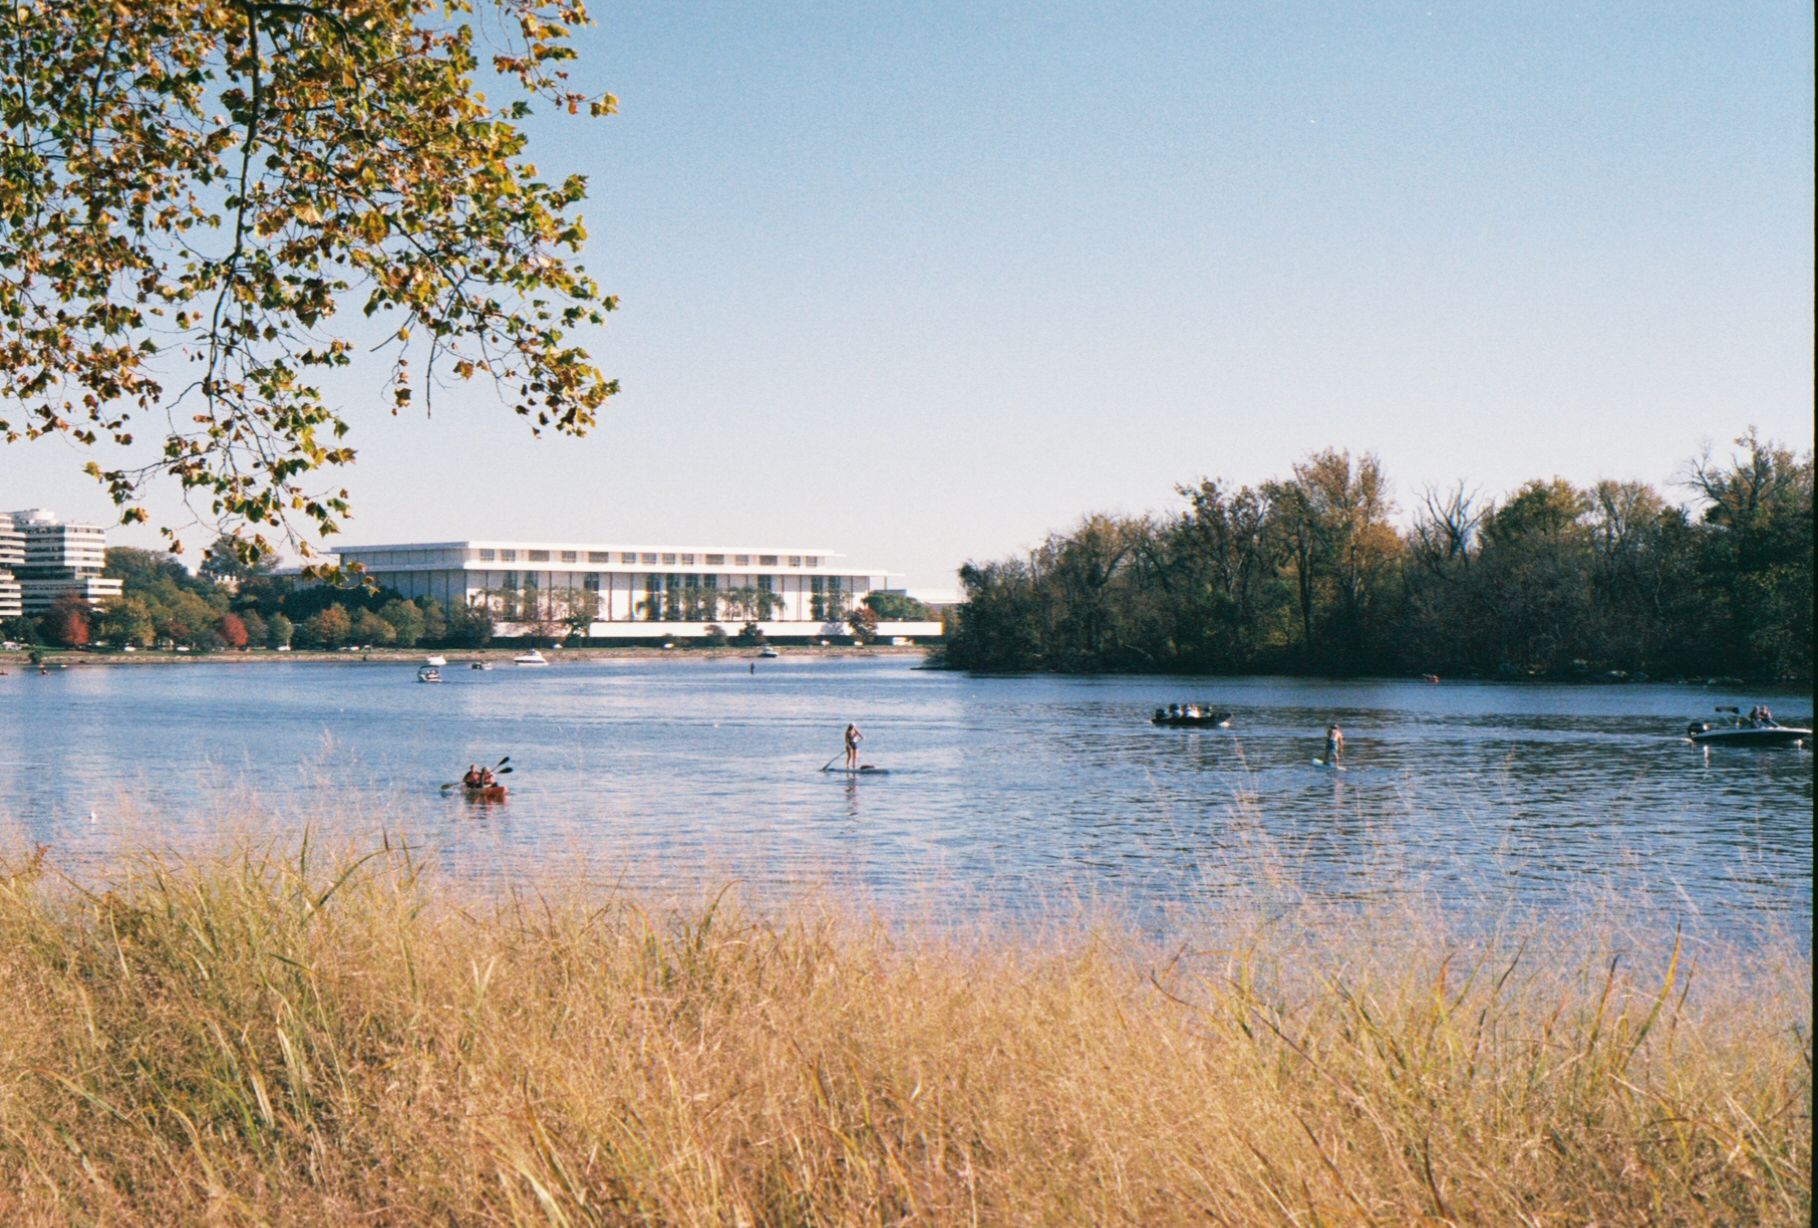 The Potomac River in autumn. The grasses are yellow. Paddlers and kayakers enjoy the river. Roosevelt Island and the Kennedy Center are visible in the background.